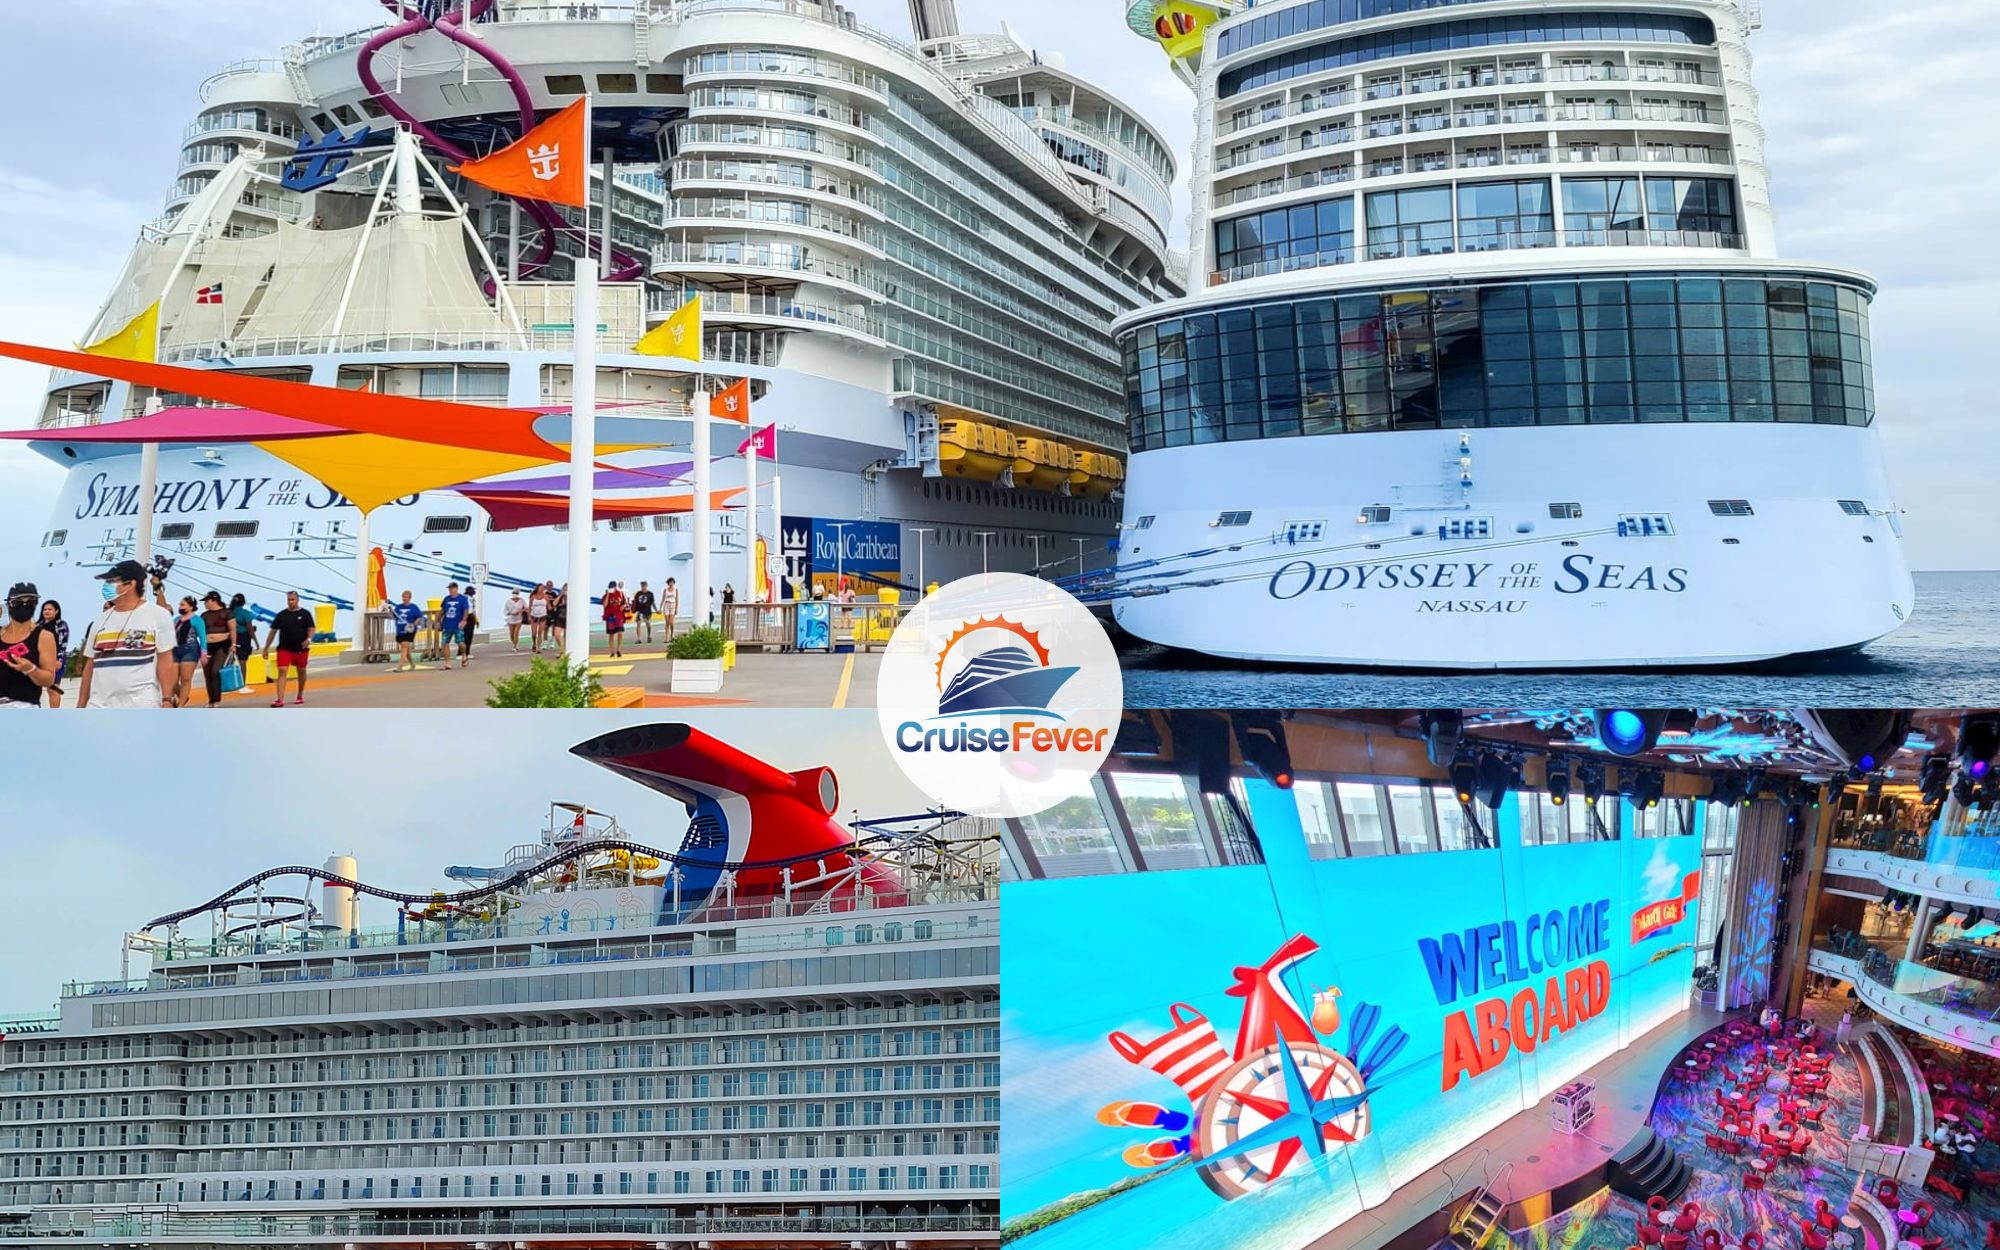 Symphony of the Seas with Quantum of the Seas and Carnival's Mardi Gras cruise ship